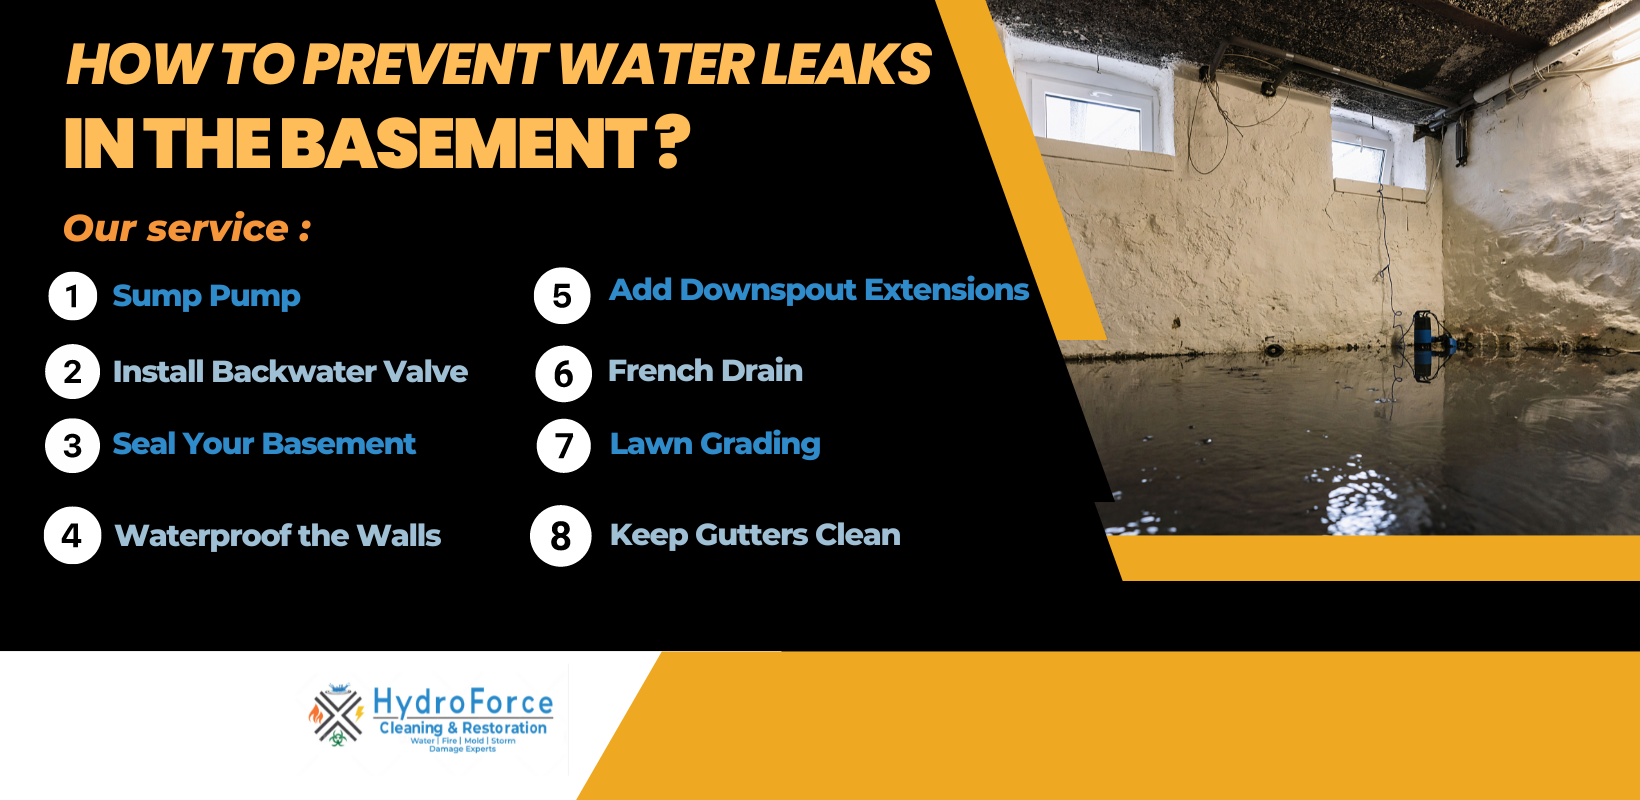 How to Prevent Water Leaks and Flooding in the Basement Due to Heavy Rain